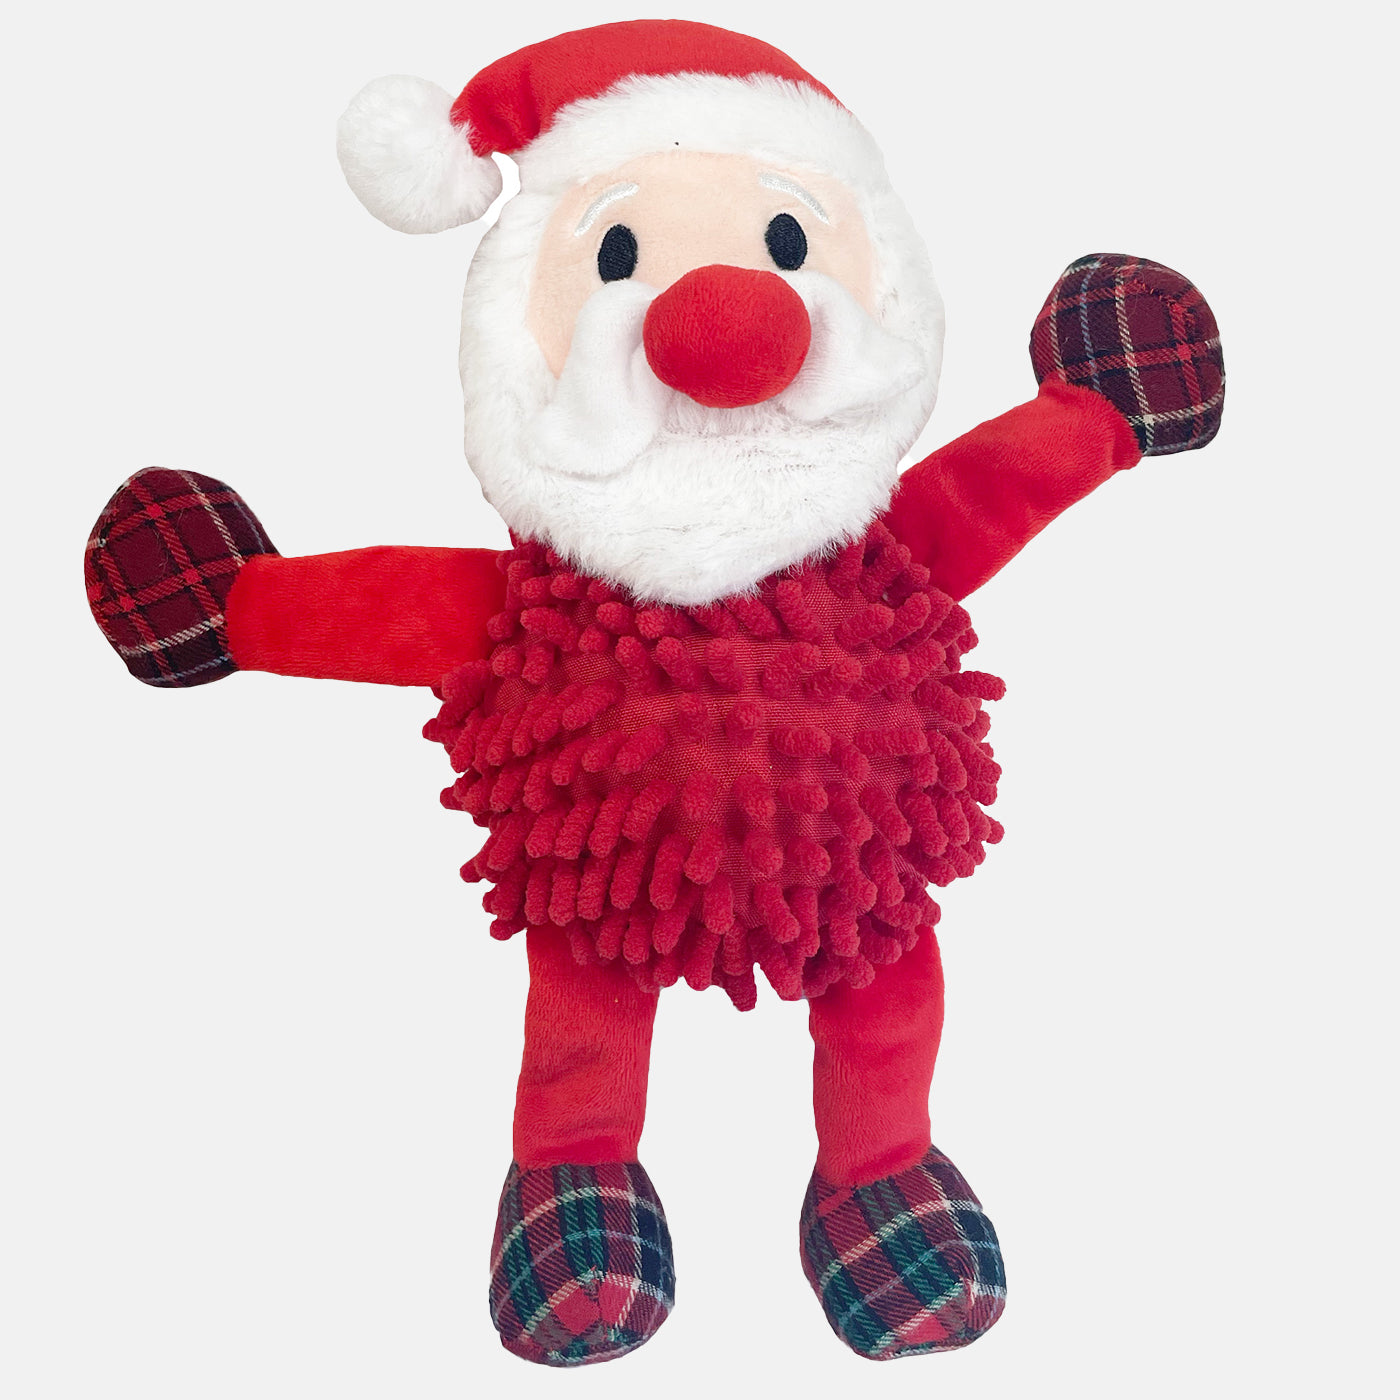 Happy Pet Noodle Santa Dog Toy, The Ideal Christmas Pet Gift For Play, Available Now at Lords & Labradors